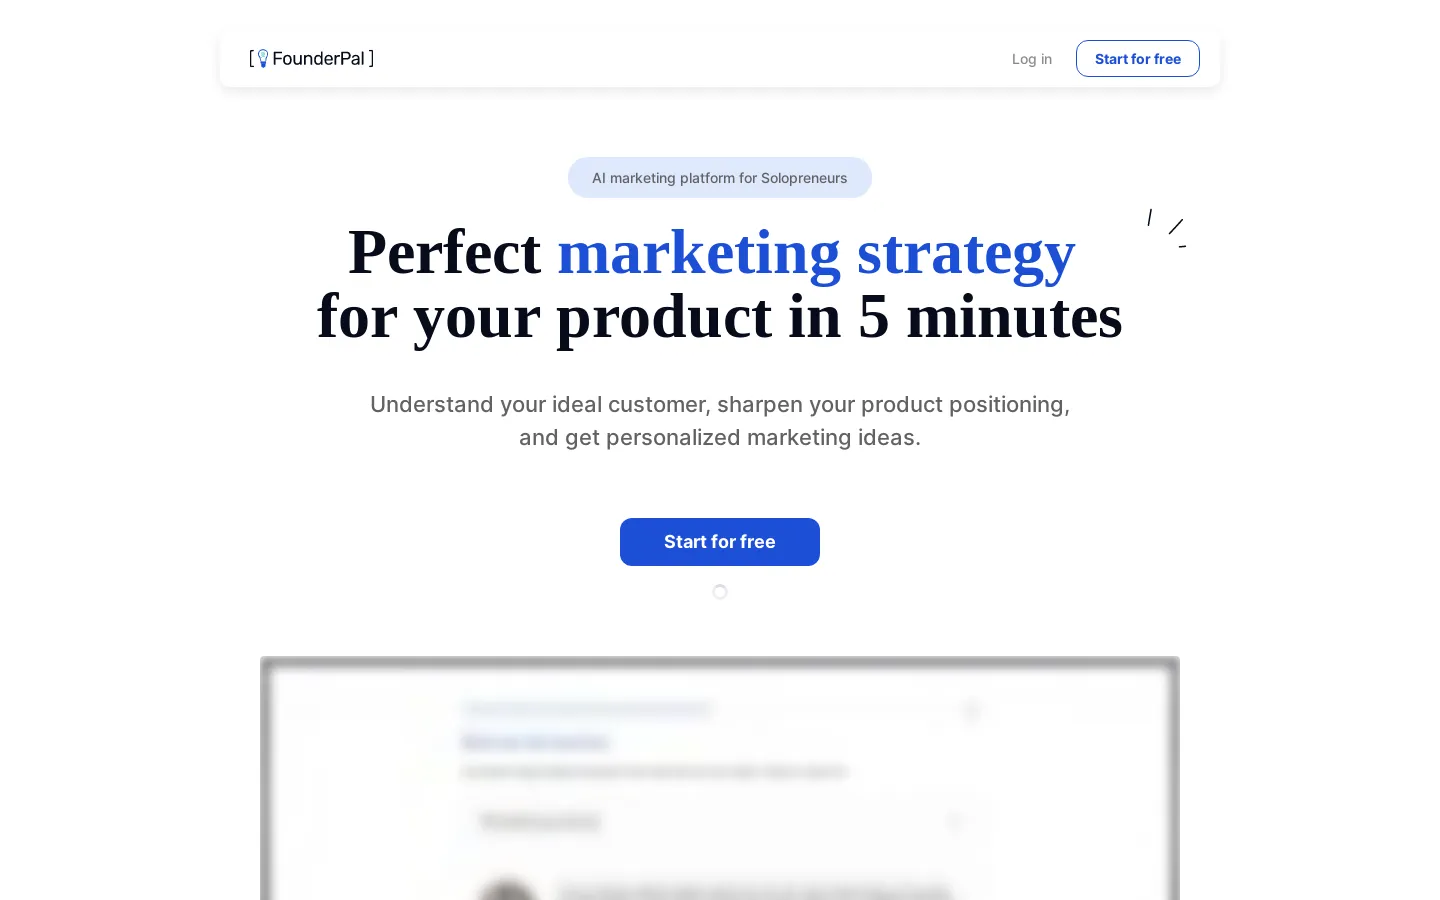 Marketing Strategy Generator — Done in 5 minutes by AI